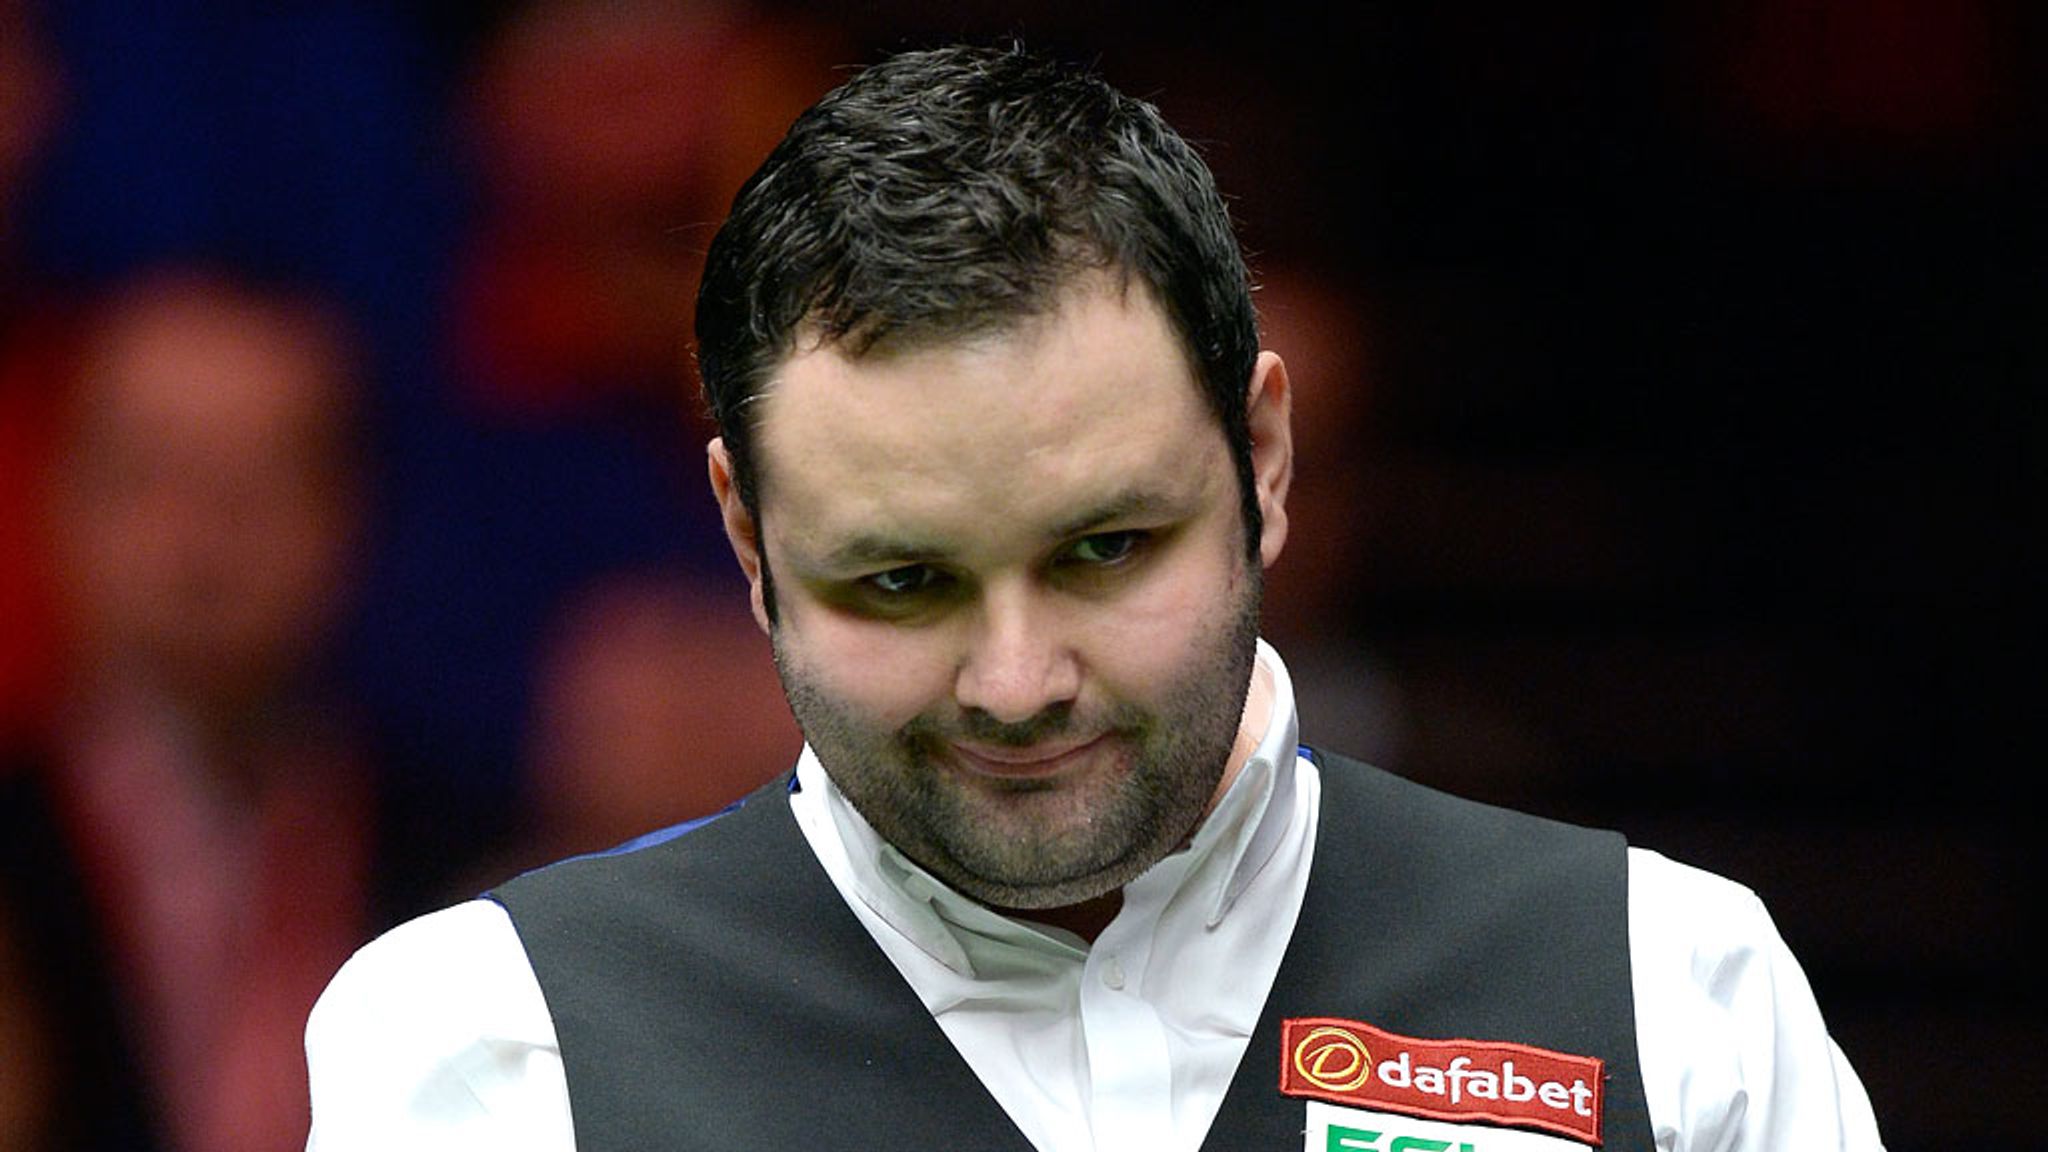 Stephen Maguire beats Mark Allen to win Coral Tour Championship Snooker News Sky Sports